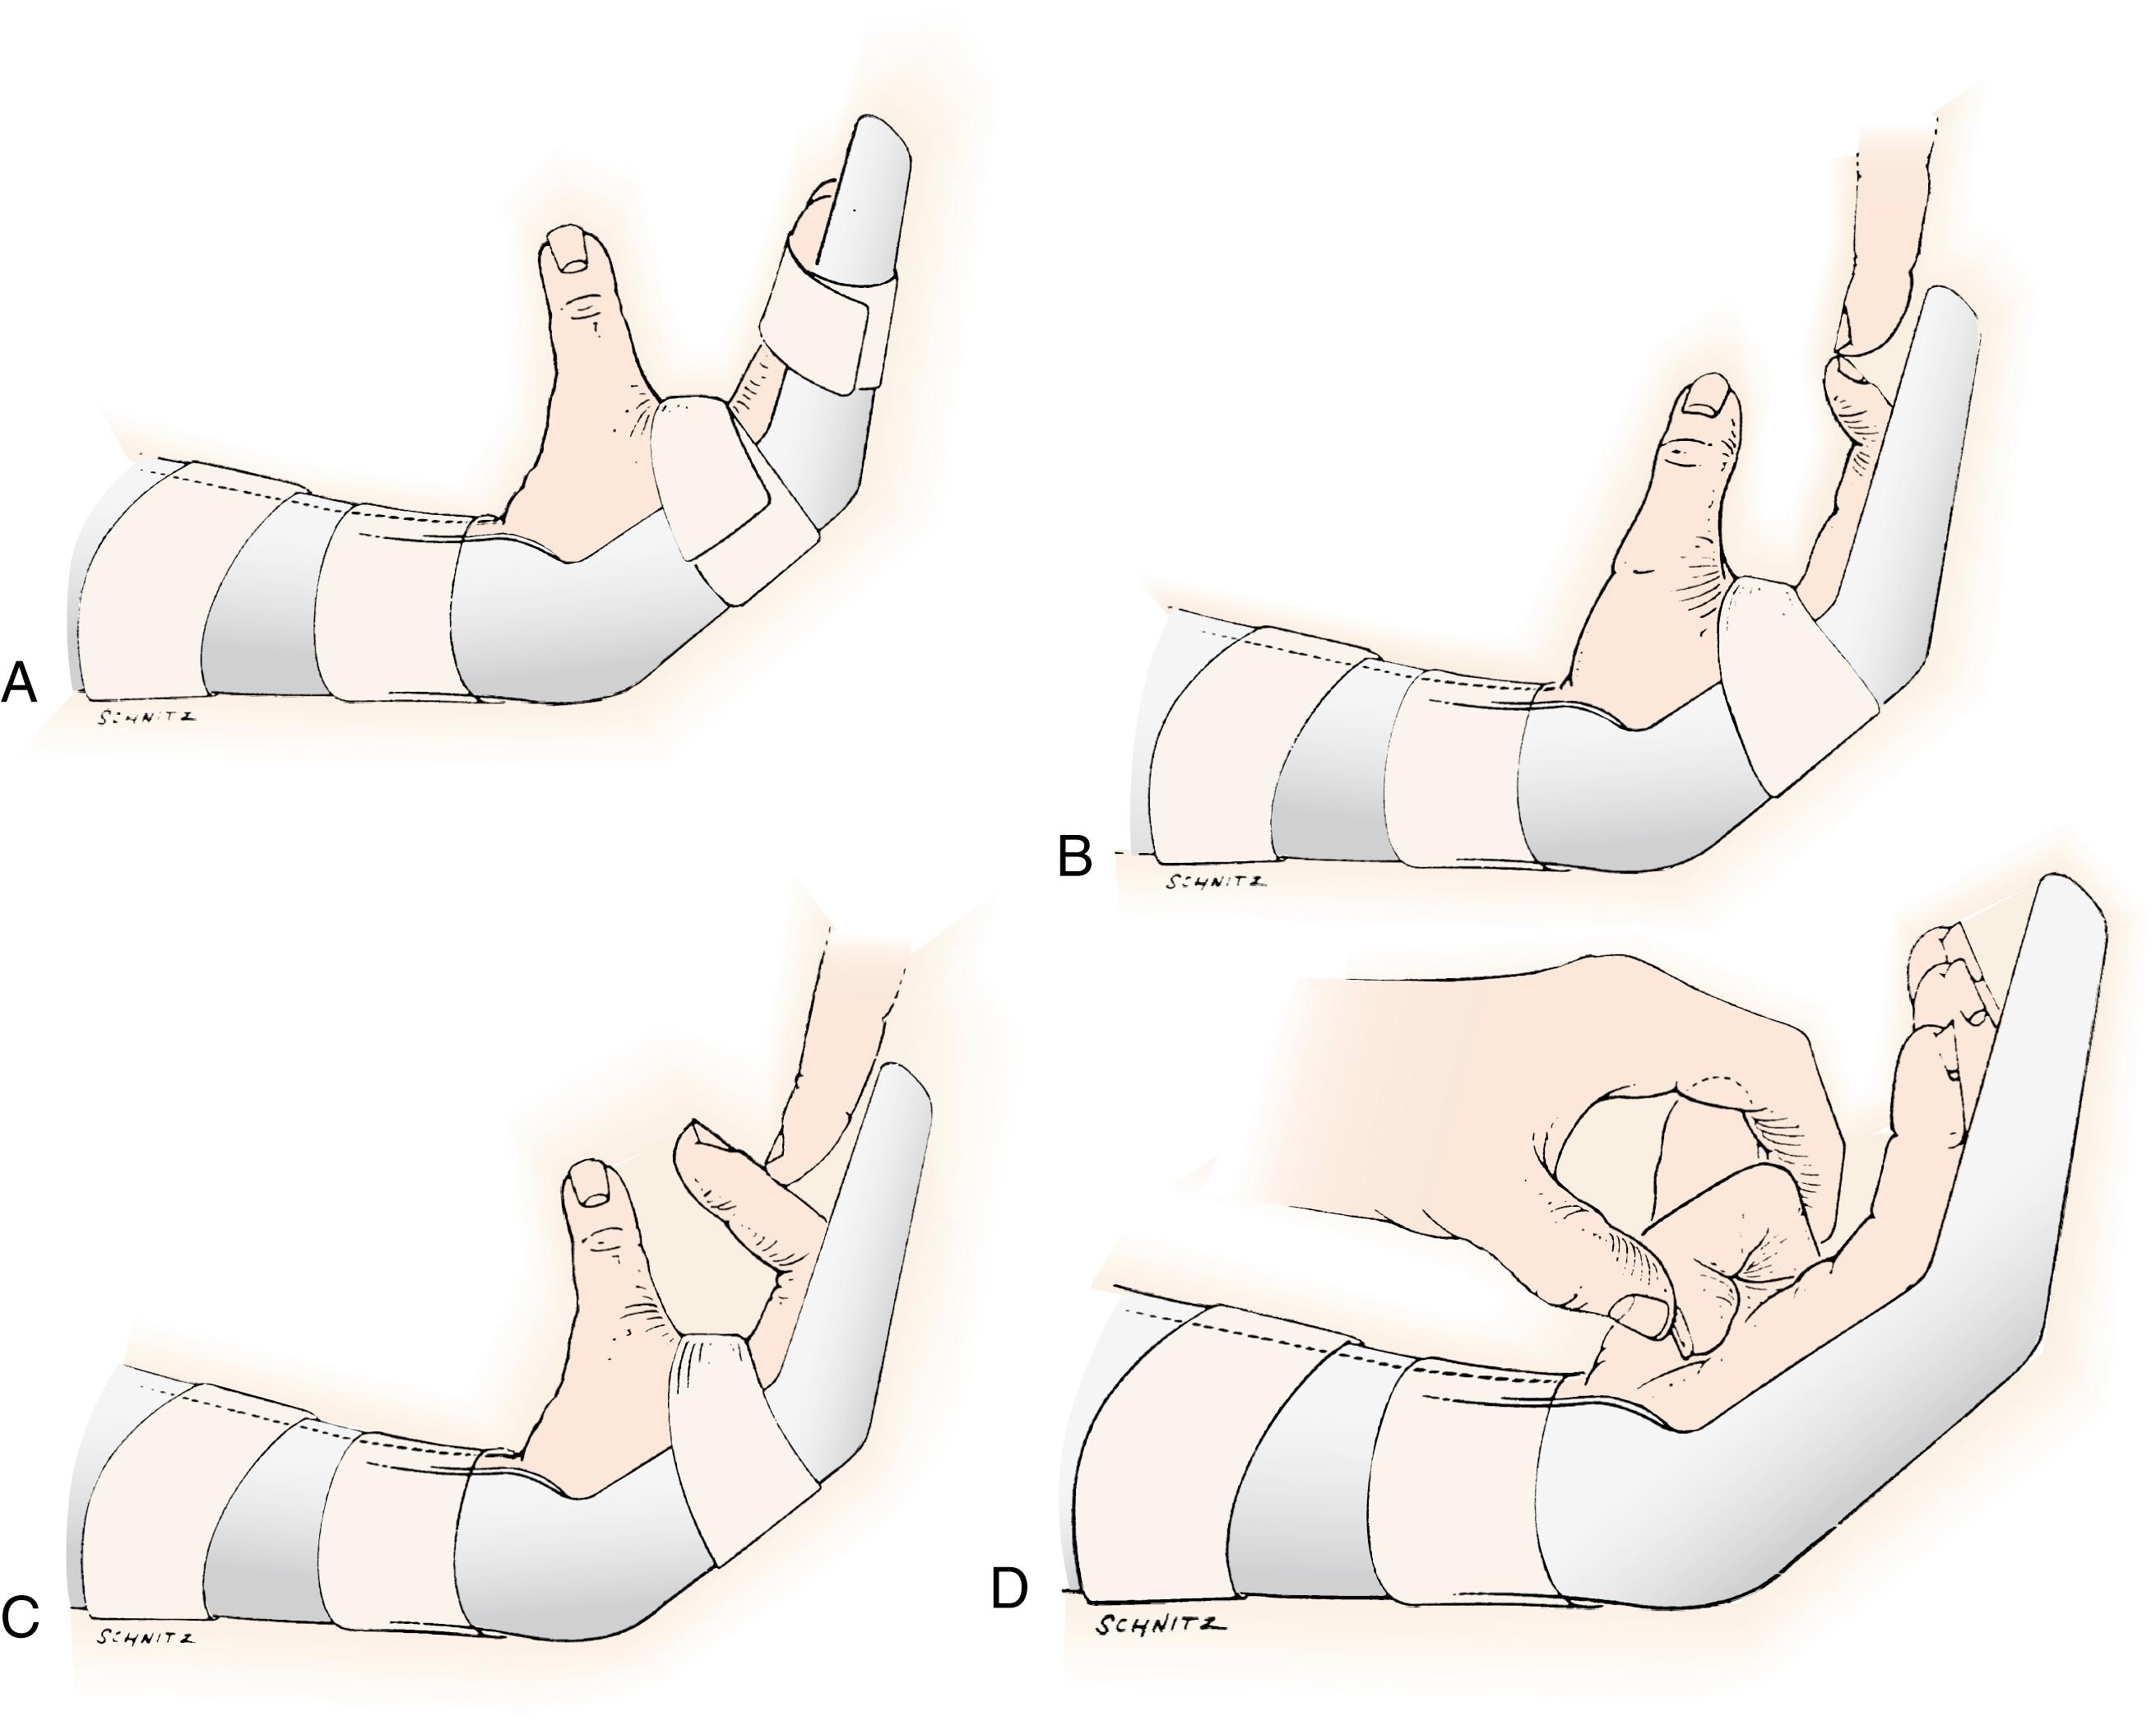 Fig. 6.16, Controlled passive motion method. A, Orthoplast dorsal blocking splint is used to hold wrist in mild flexion, MCP joints in about 45 degrees of flexion, and PIP and DIP joints in nearly full extension. B, Full isolated passive flexion of DIP joint. C, Full isolated passive flexion of PIP joint. D, Full passive flexion of MCP, PIP, and DIP joints.